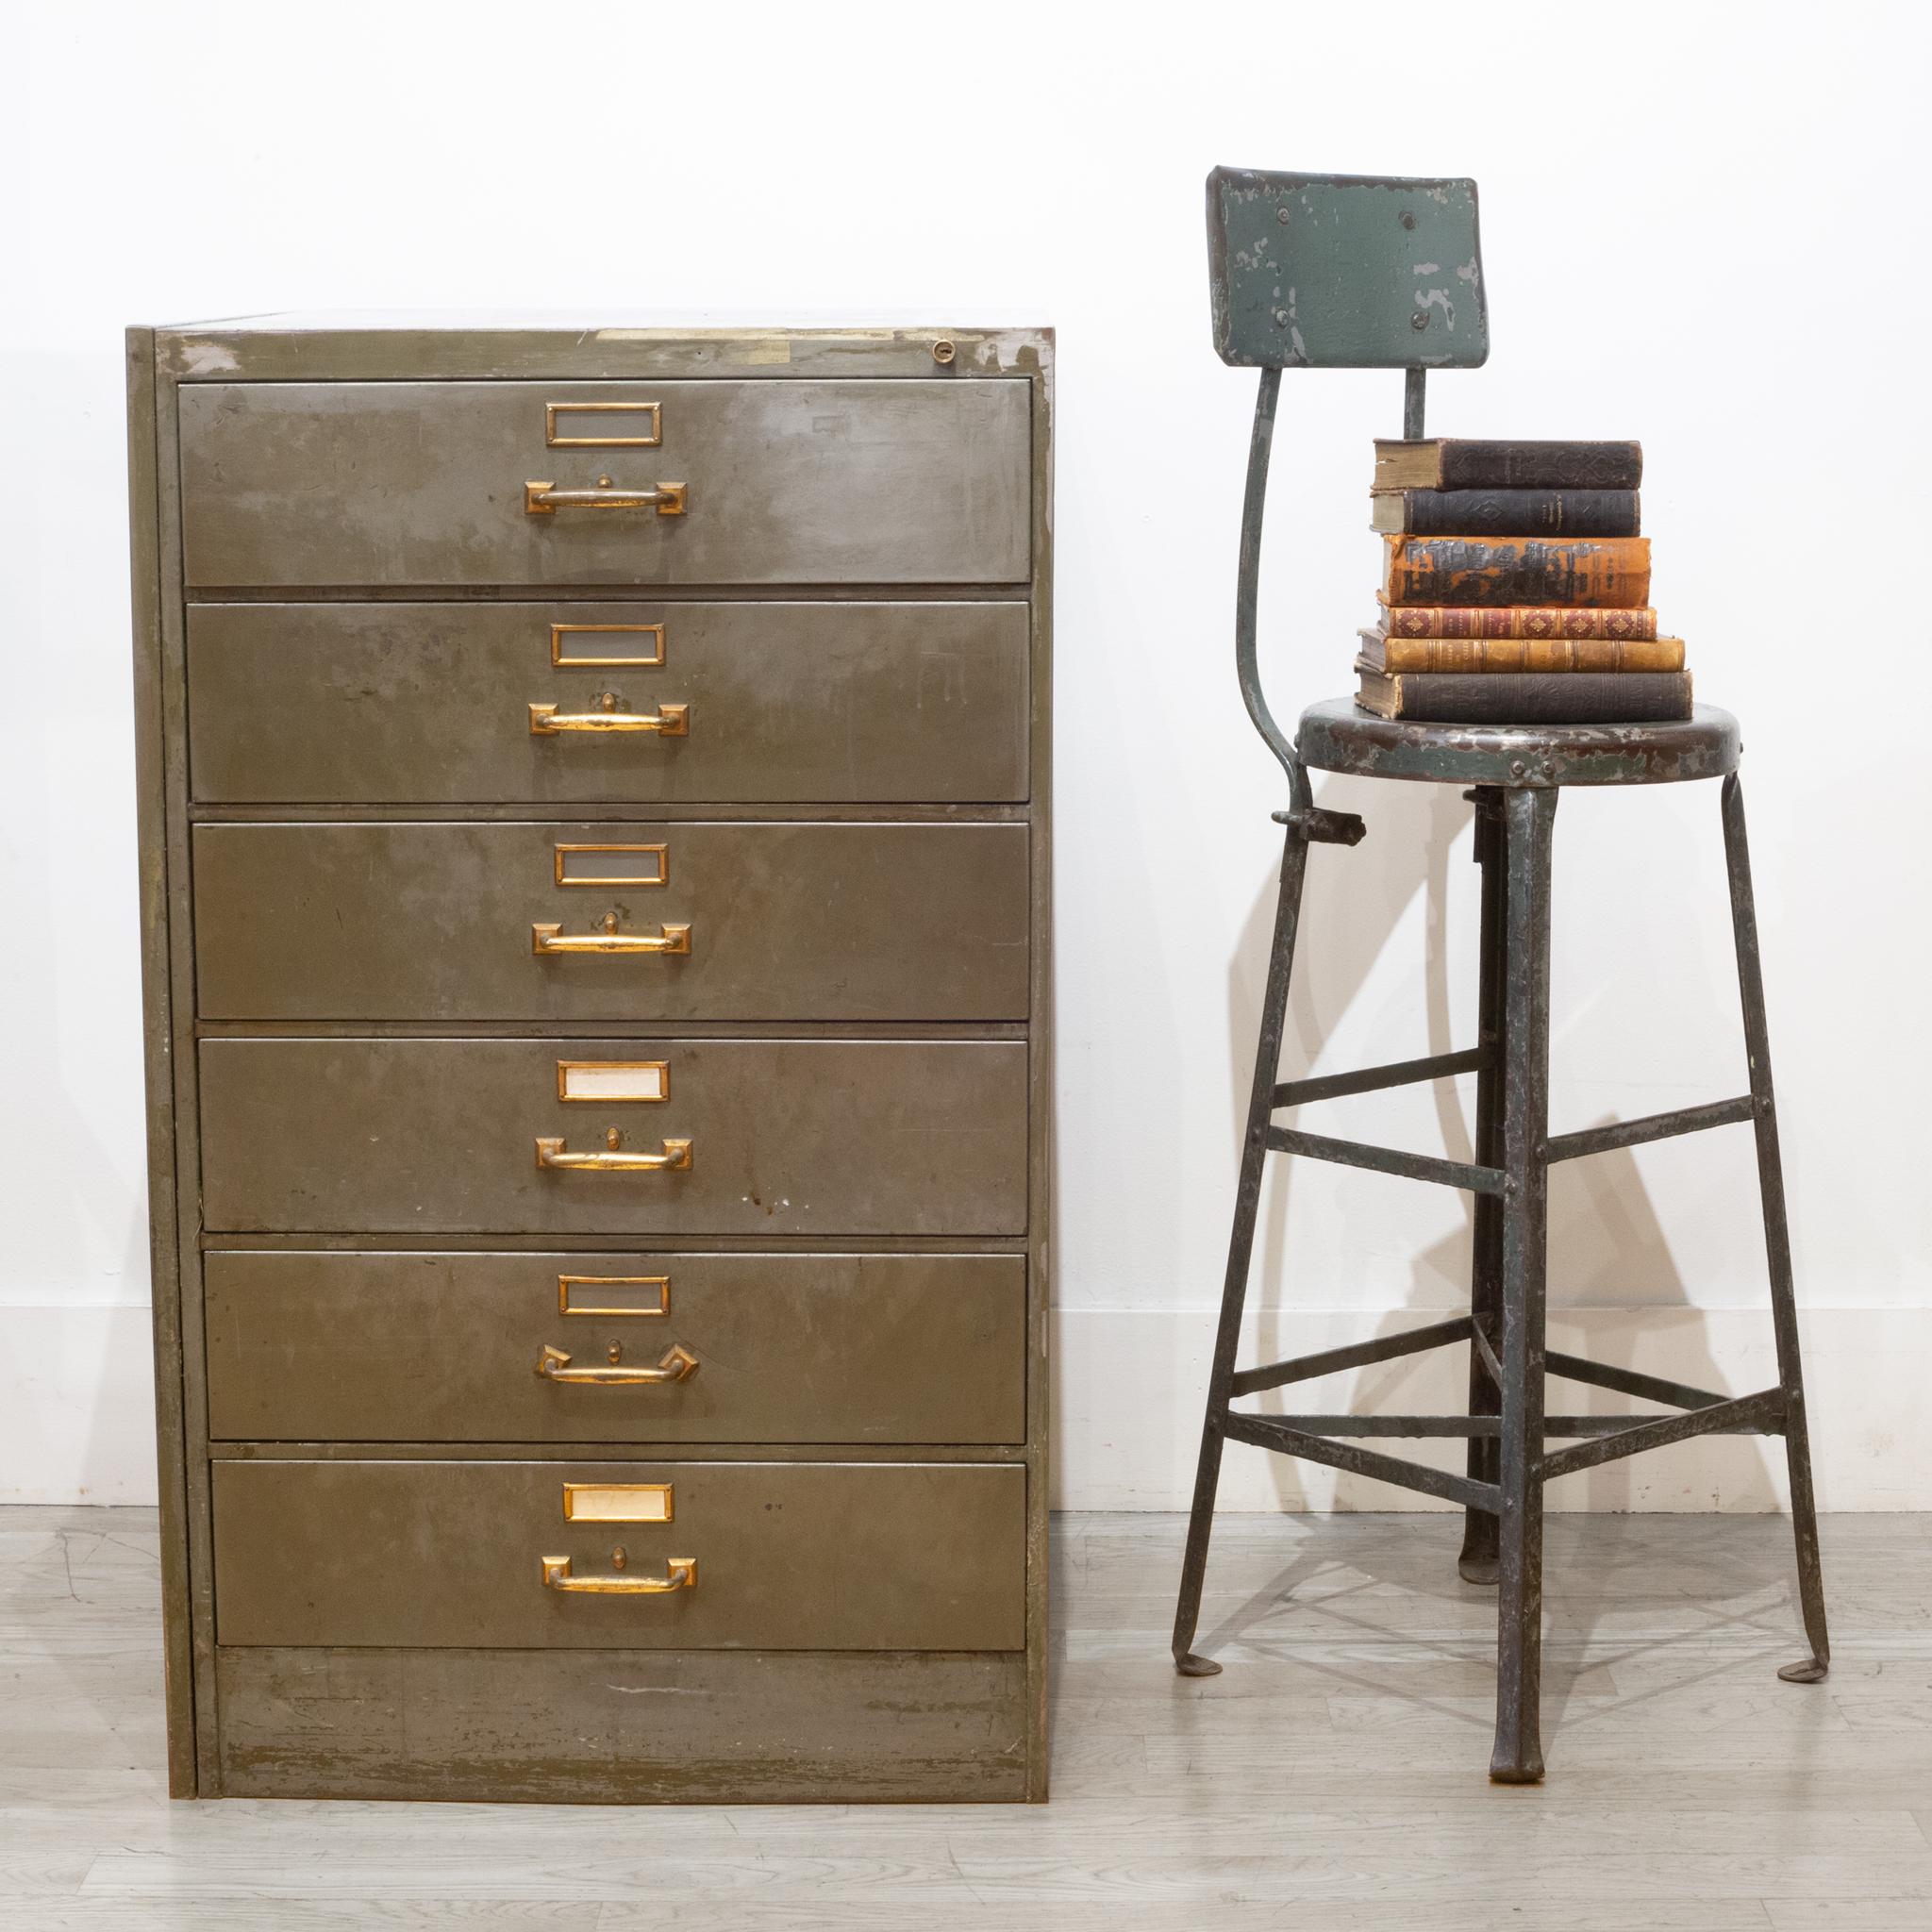 About

An original all metal six drawer file cabinet with brass handles and brass card holders. Each drawer has a unique release lever that unlocks the drawers. One cabinet has an original label. This piece is solidly built and each drawer opens